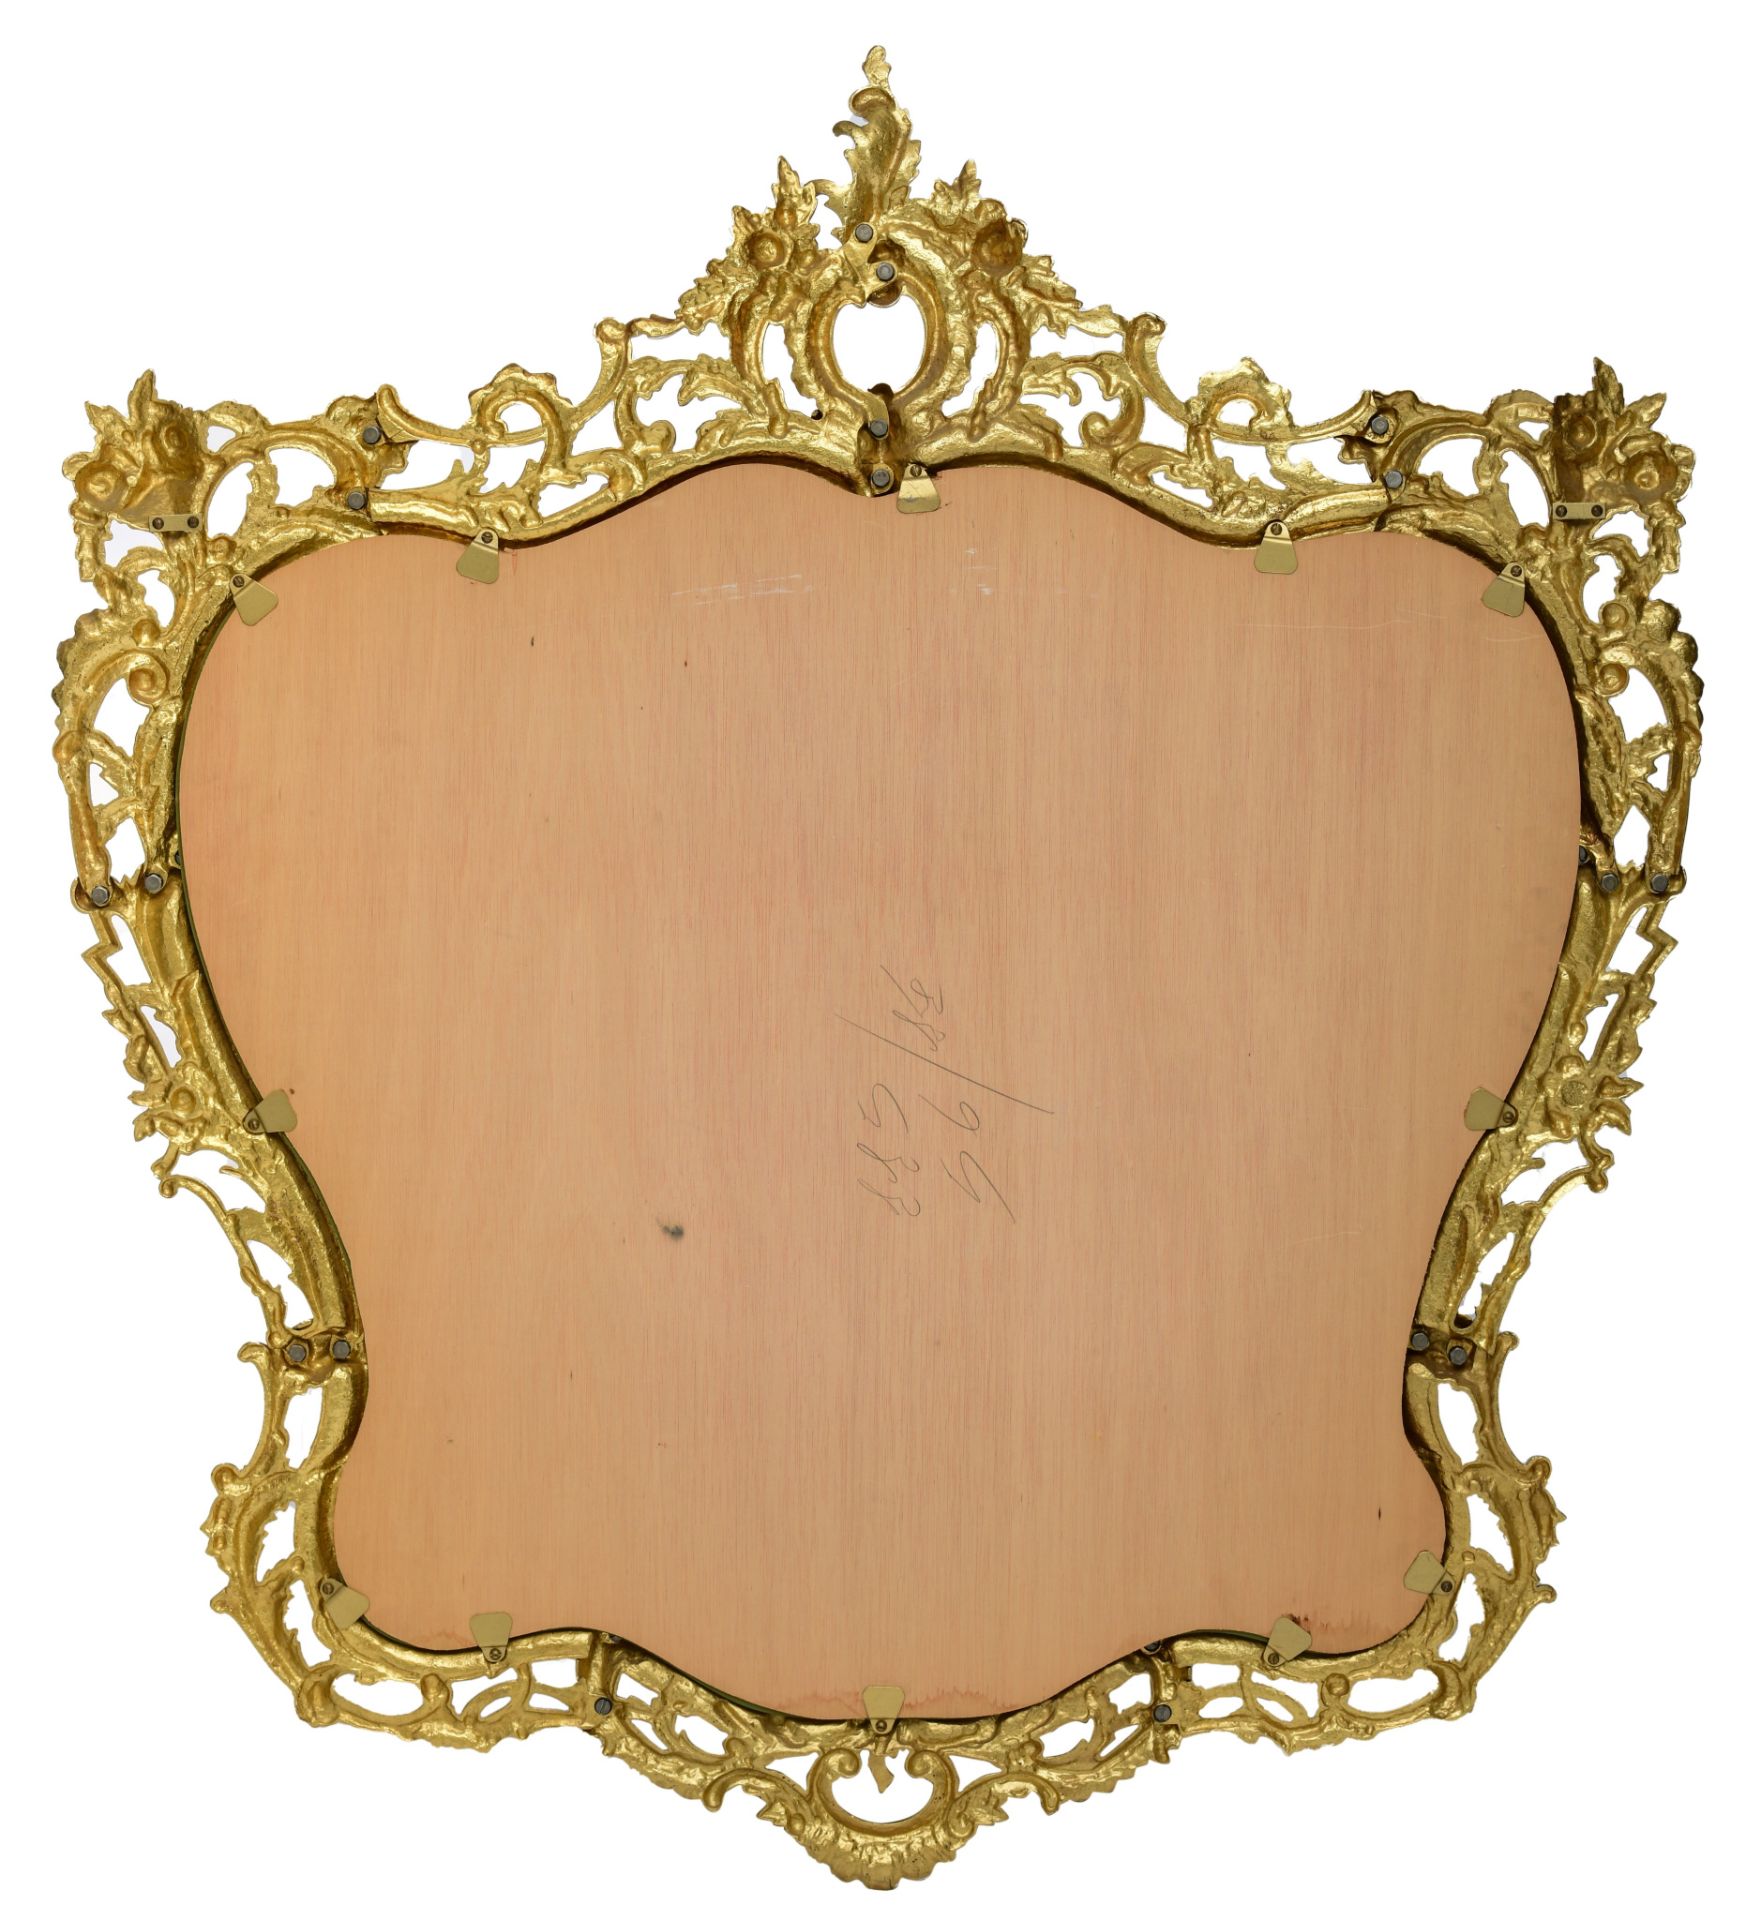 A large Rococo style gilt metal console table and mirror, H 125 - W 110 cm (the mirror) - H 85 - W 1 - Image 10 of 12